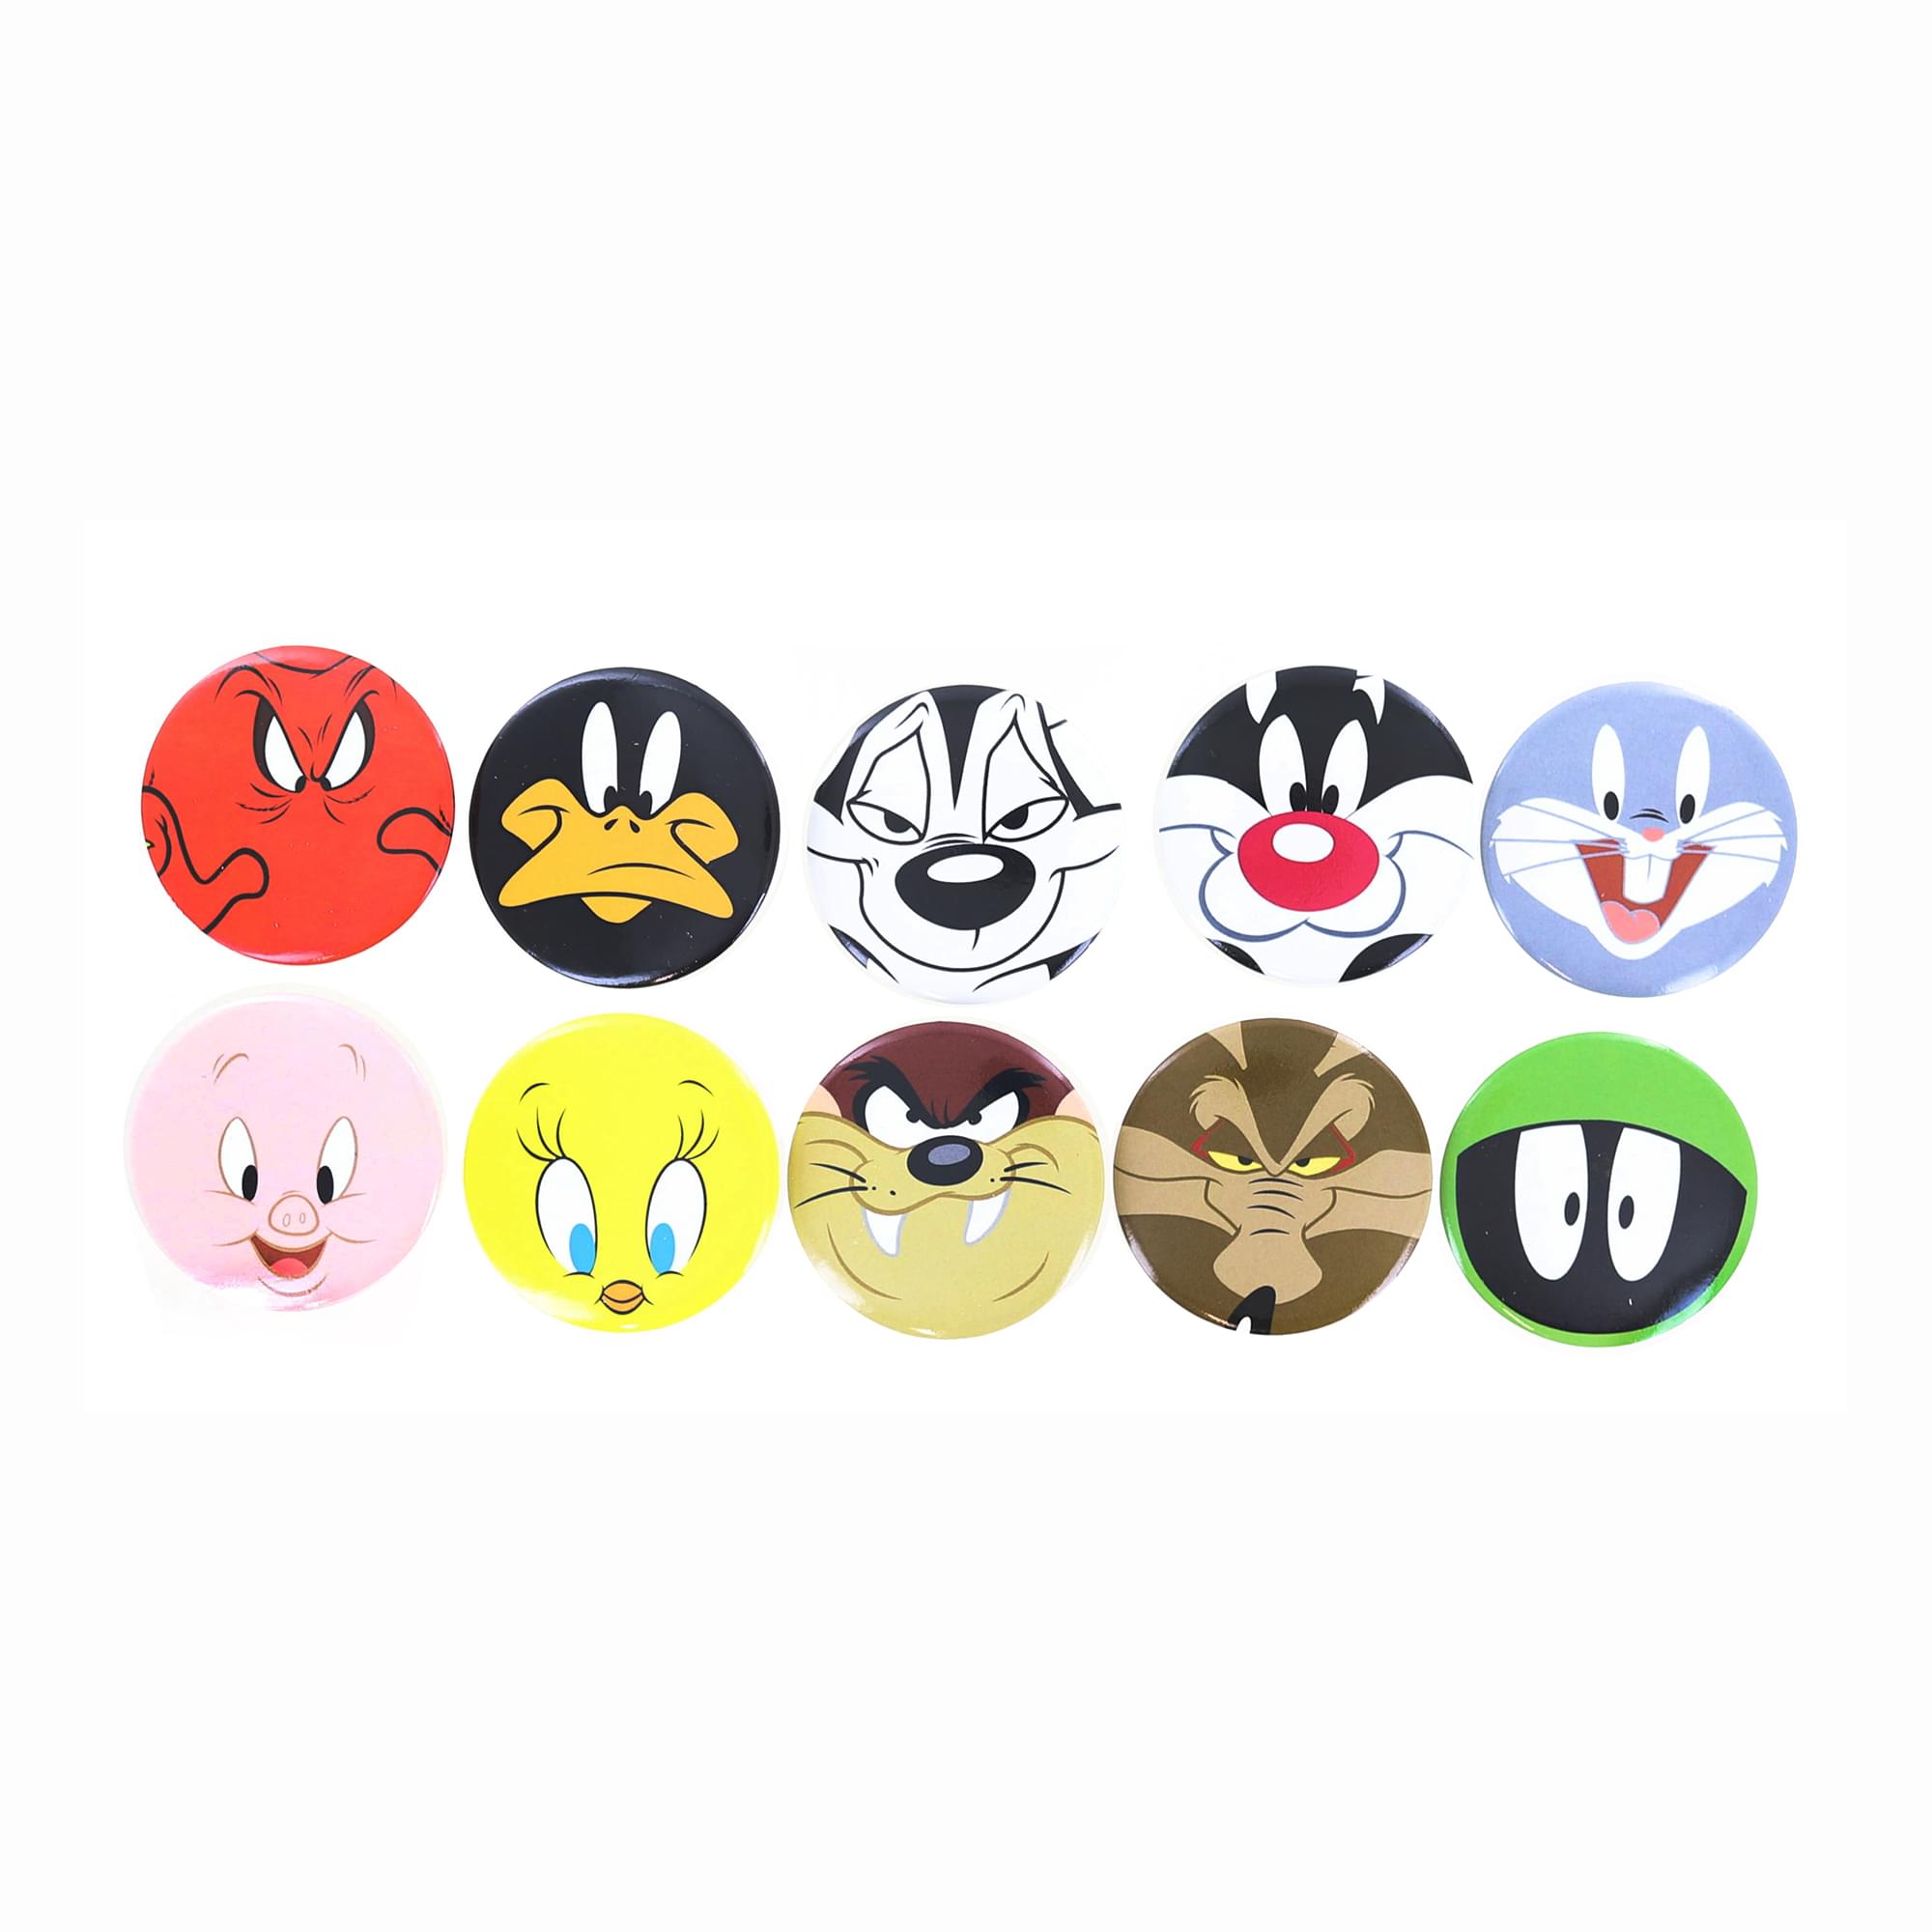 Looney Toons Characters 10-Piece Button Pin Boxed Set